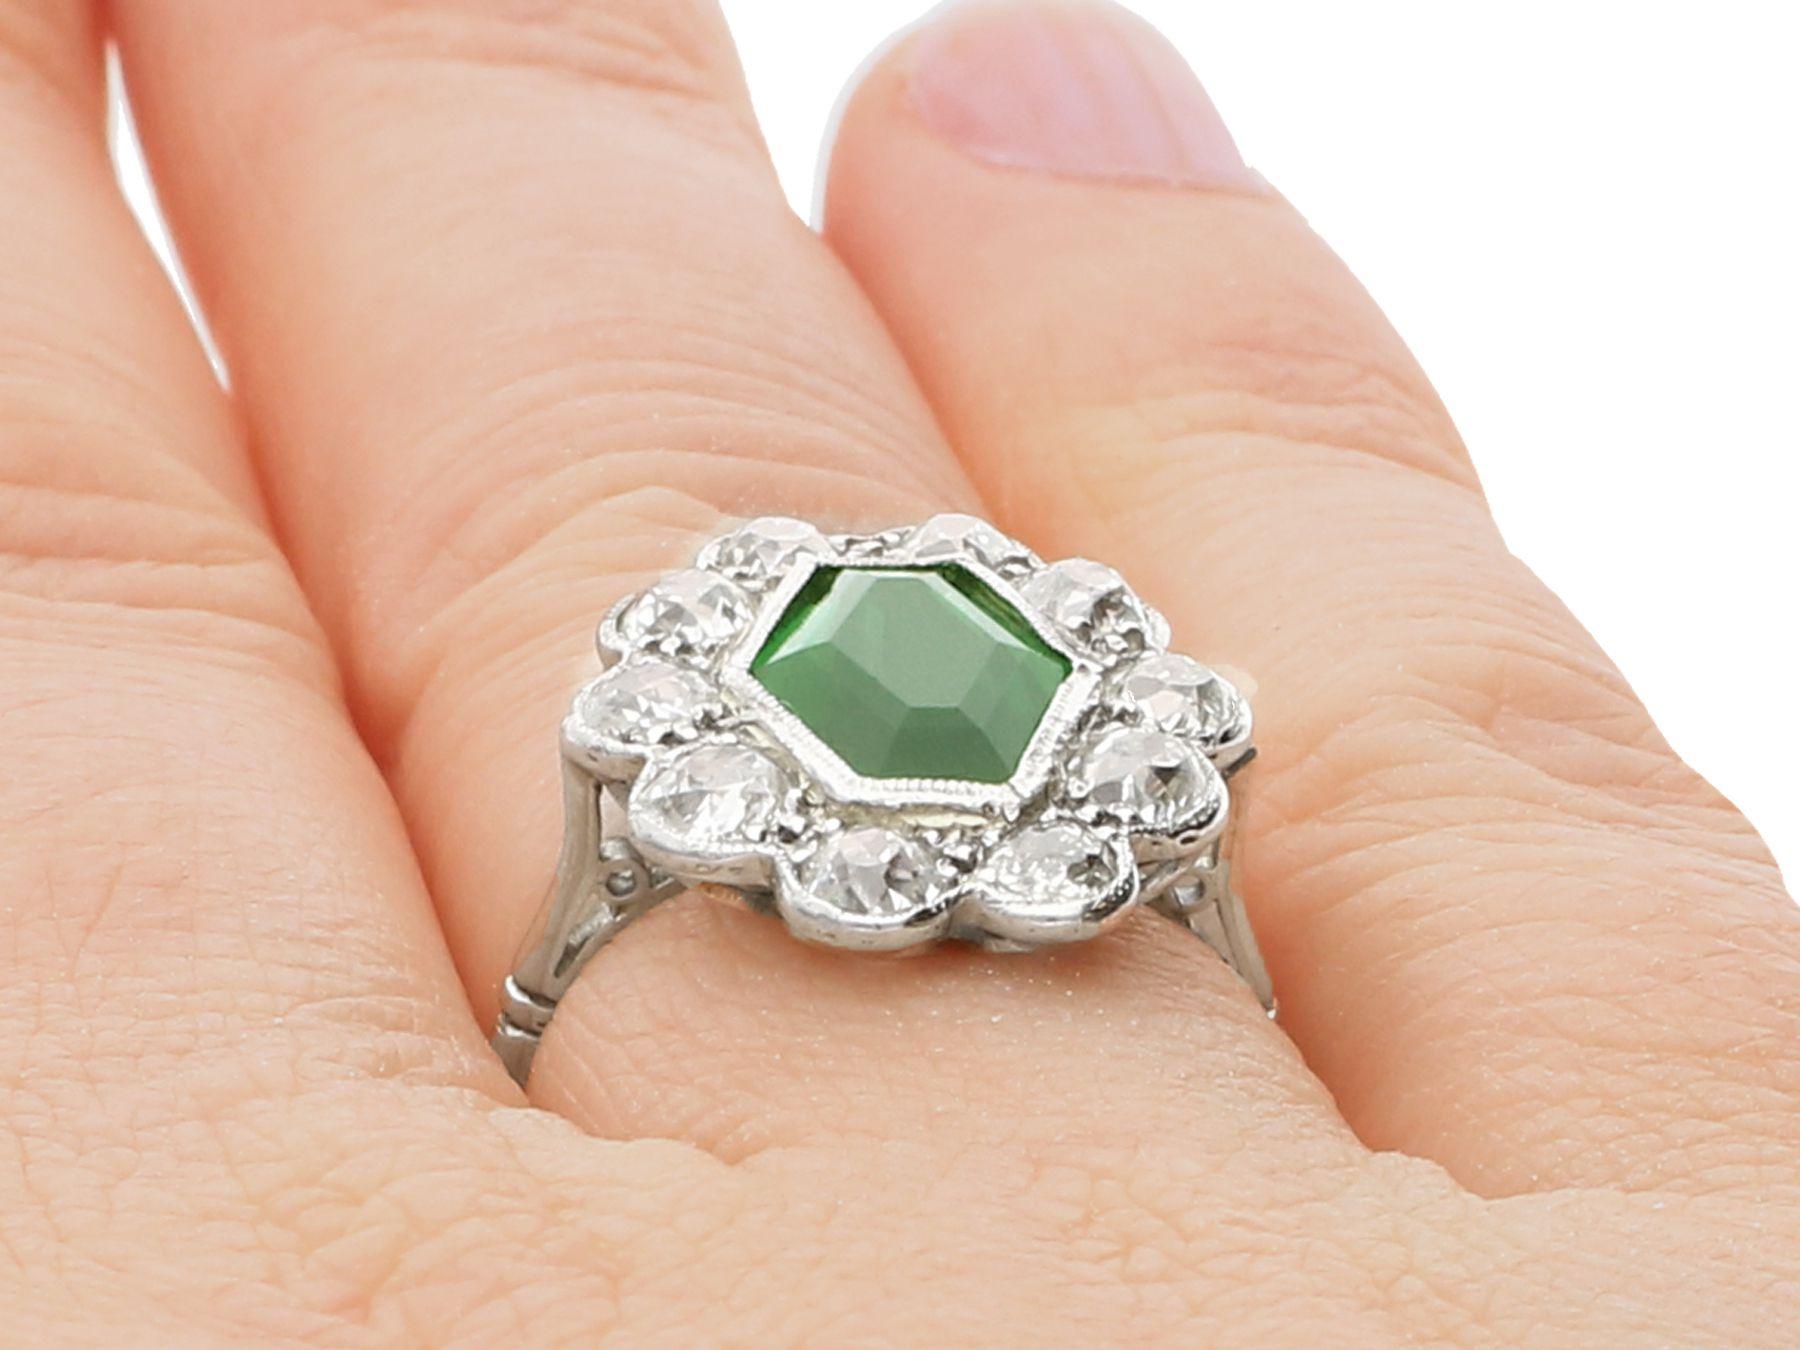 Antique 1.45 Carat Tourmaline and 1.96 Carat Diamond White Gold Cocktail Ring For Sale 3